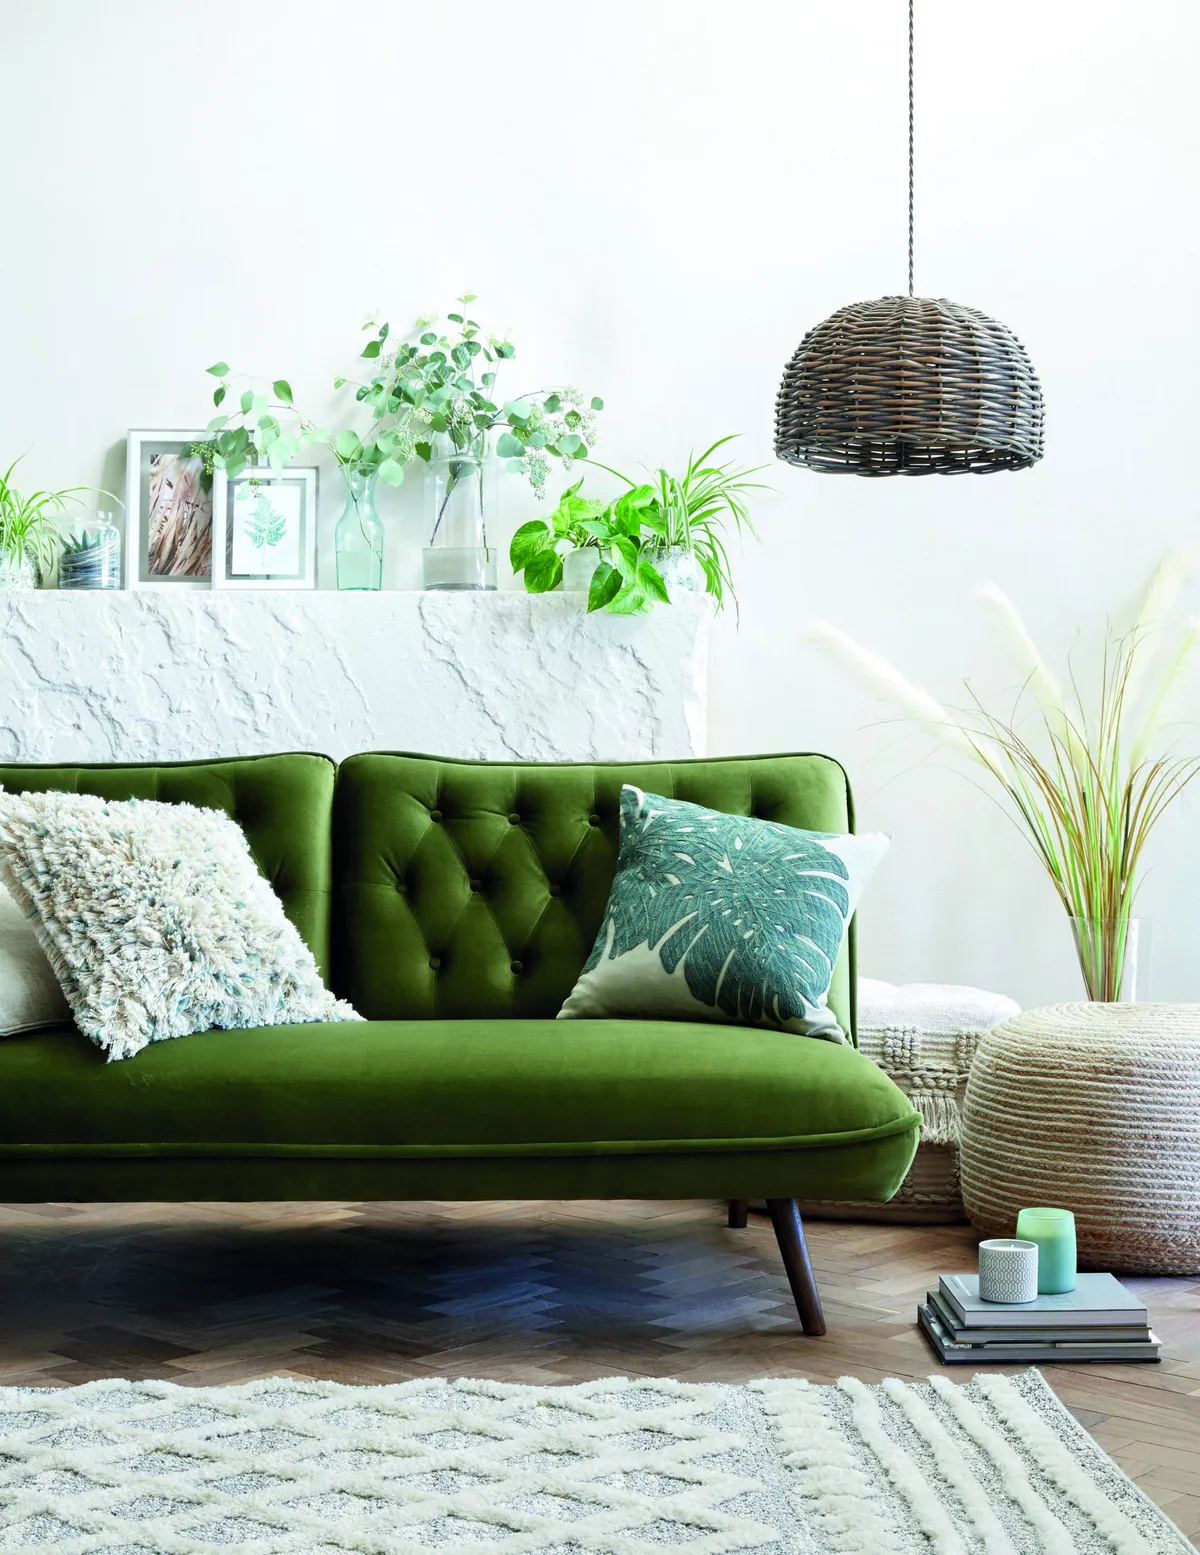 Elodie velvet sofa bed, £299; Ava pebble cushion, £18; Taza rug, from £55; Sanctuary cheese plant cushion, £22; Pampas grass stem, £5.50; Lari wicker weave easy-fit pendant, £29, all Dunelm